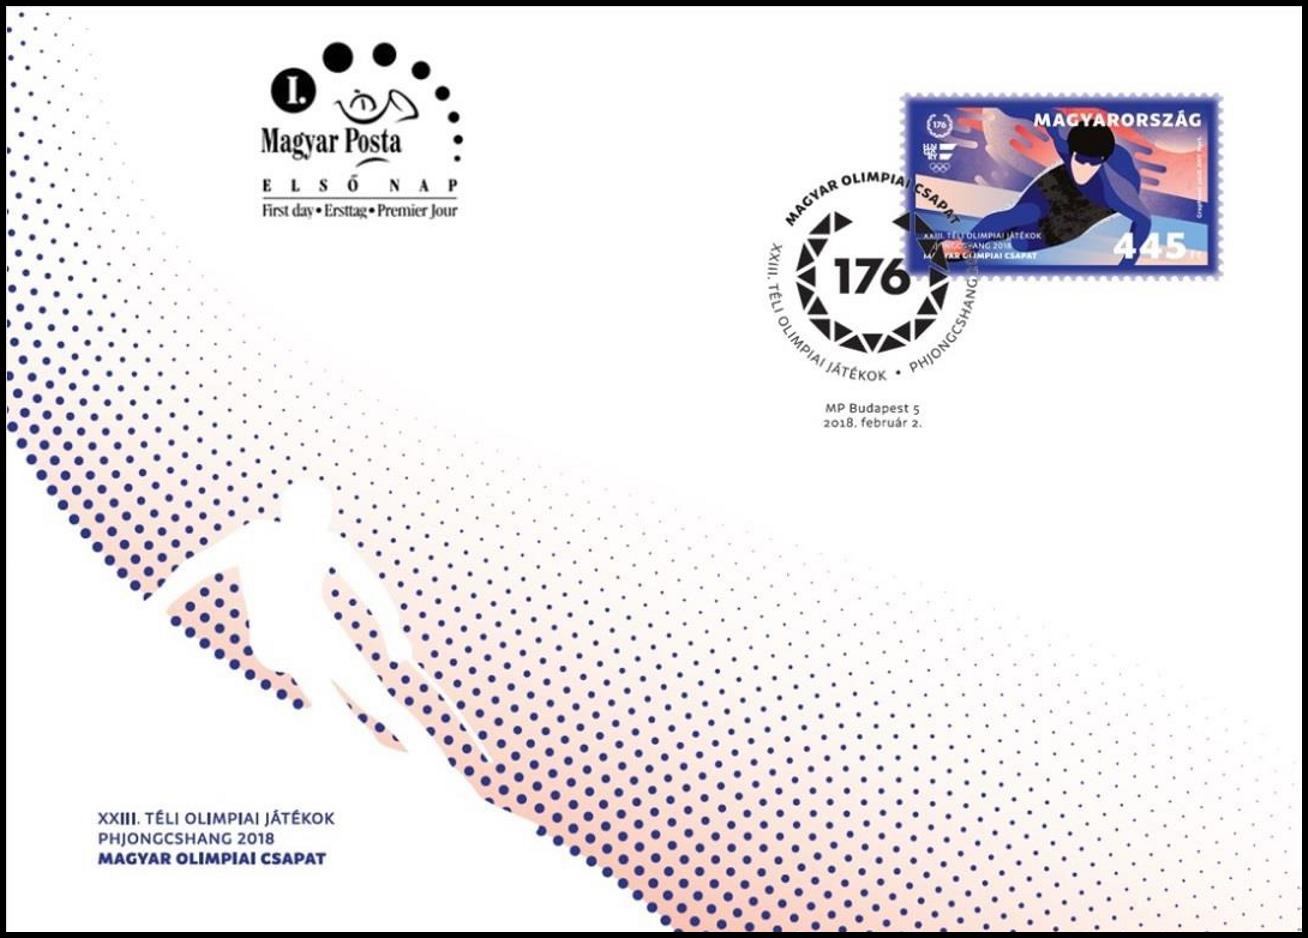 Hungary - 2018 Winter Olympics, released February 2, 2018 [first day cover]